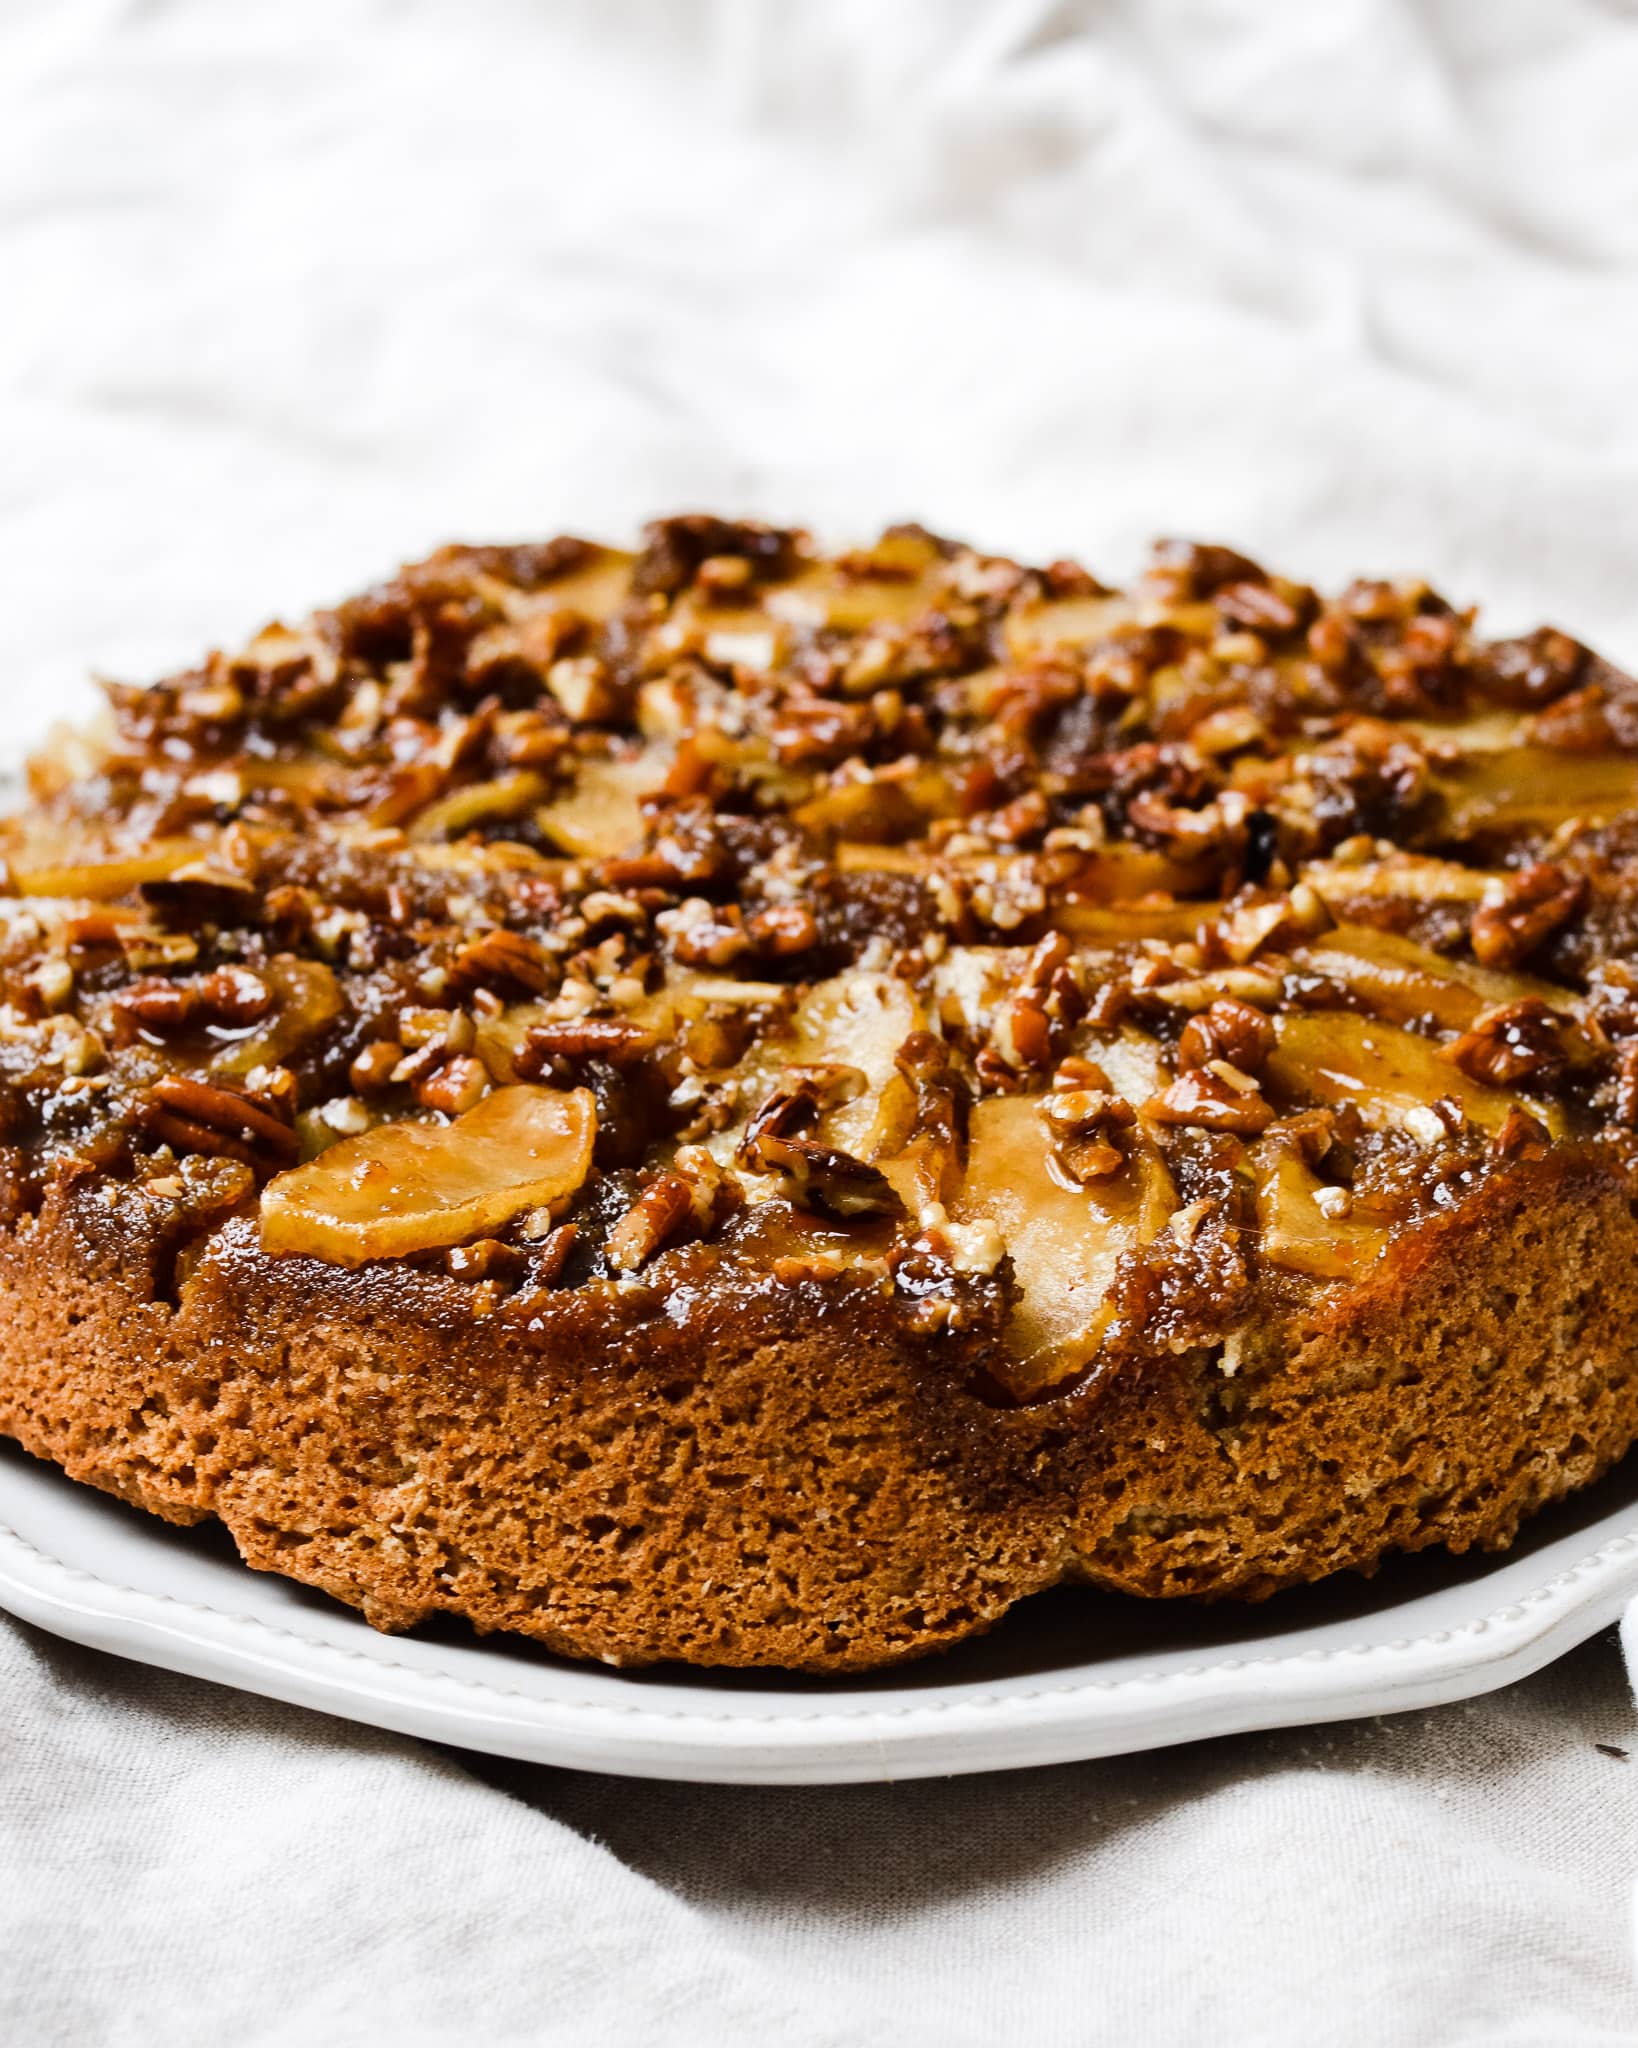 Secrets To The Best Old Fashioned Swedish Apple Cake